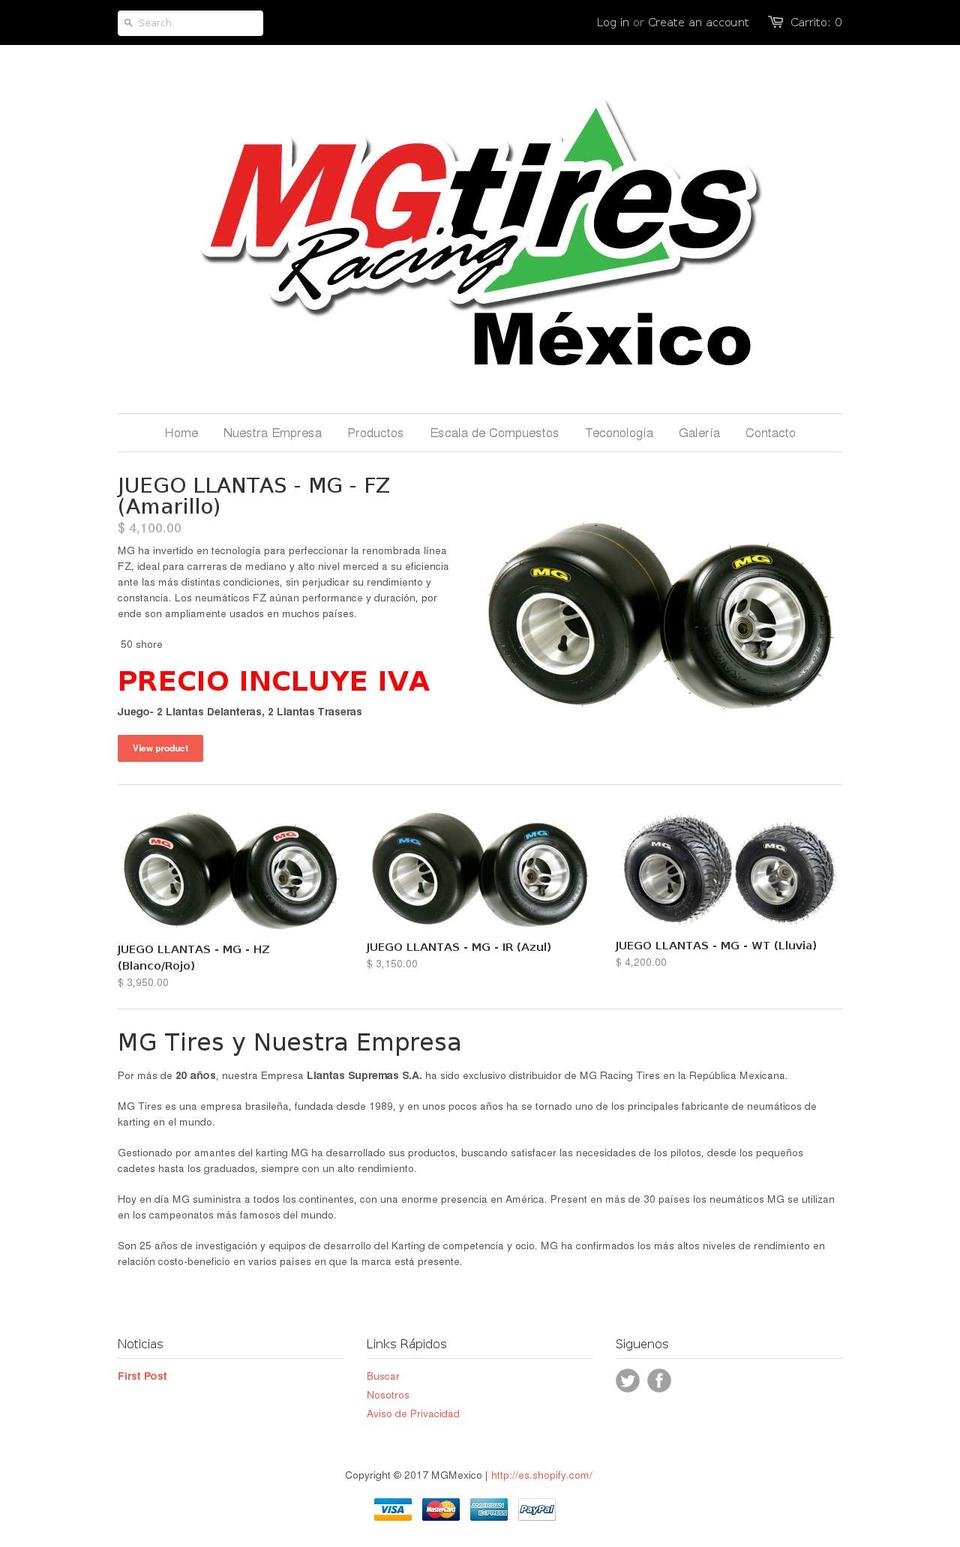 shoes Shopify theme site example mgmexico.com